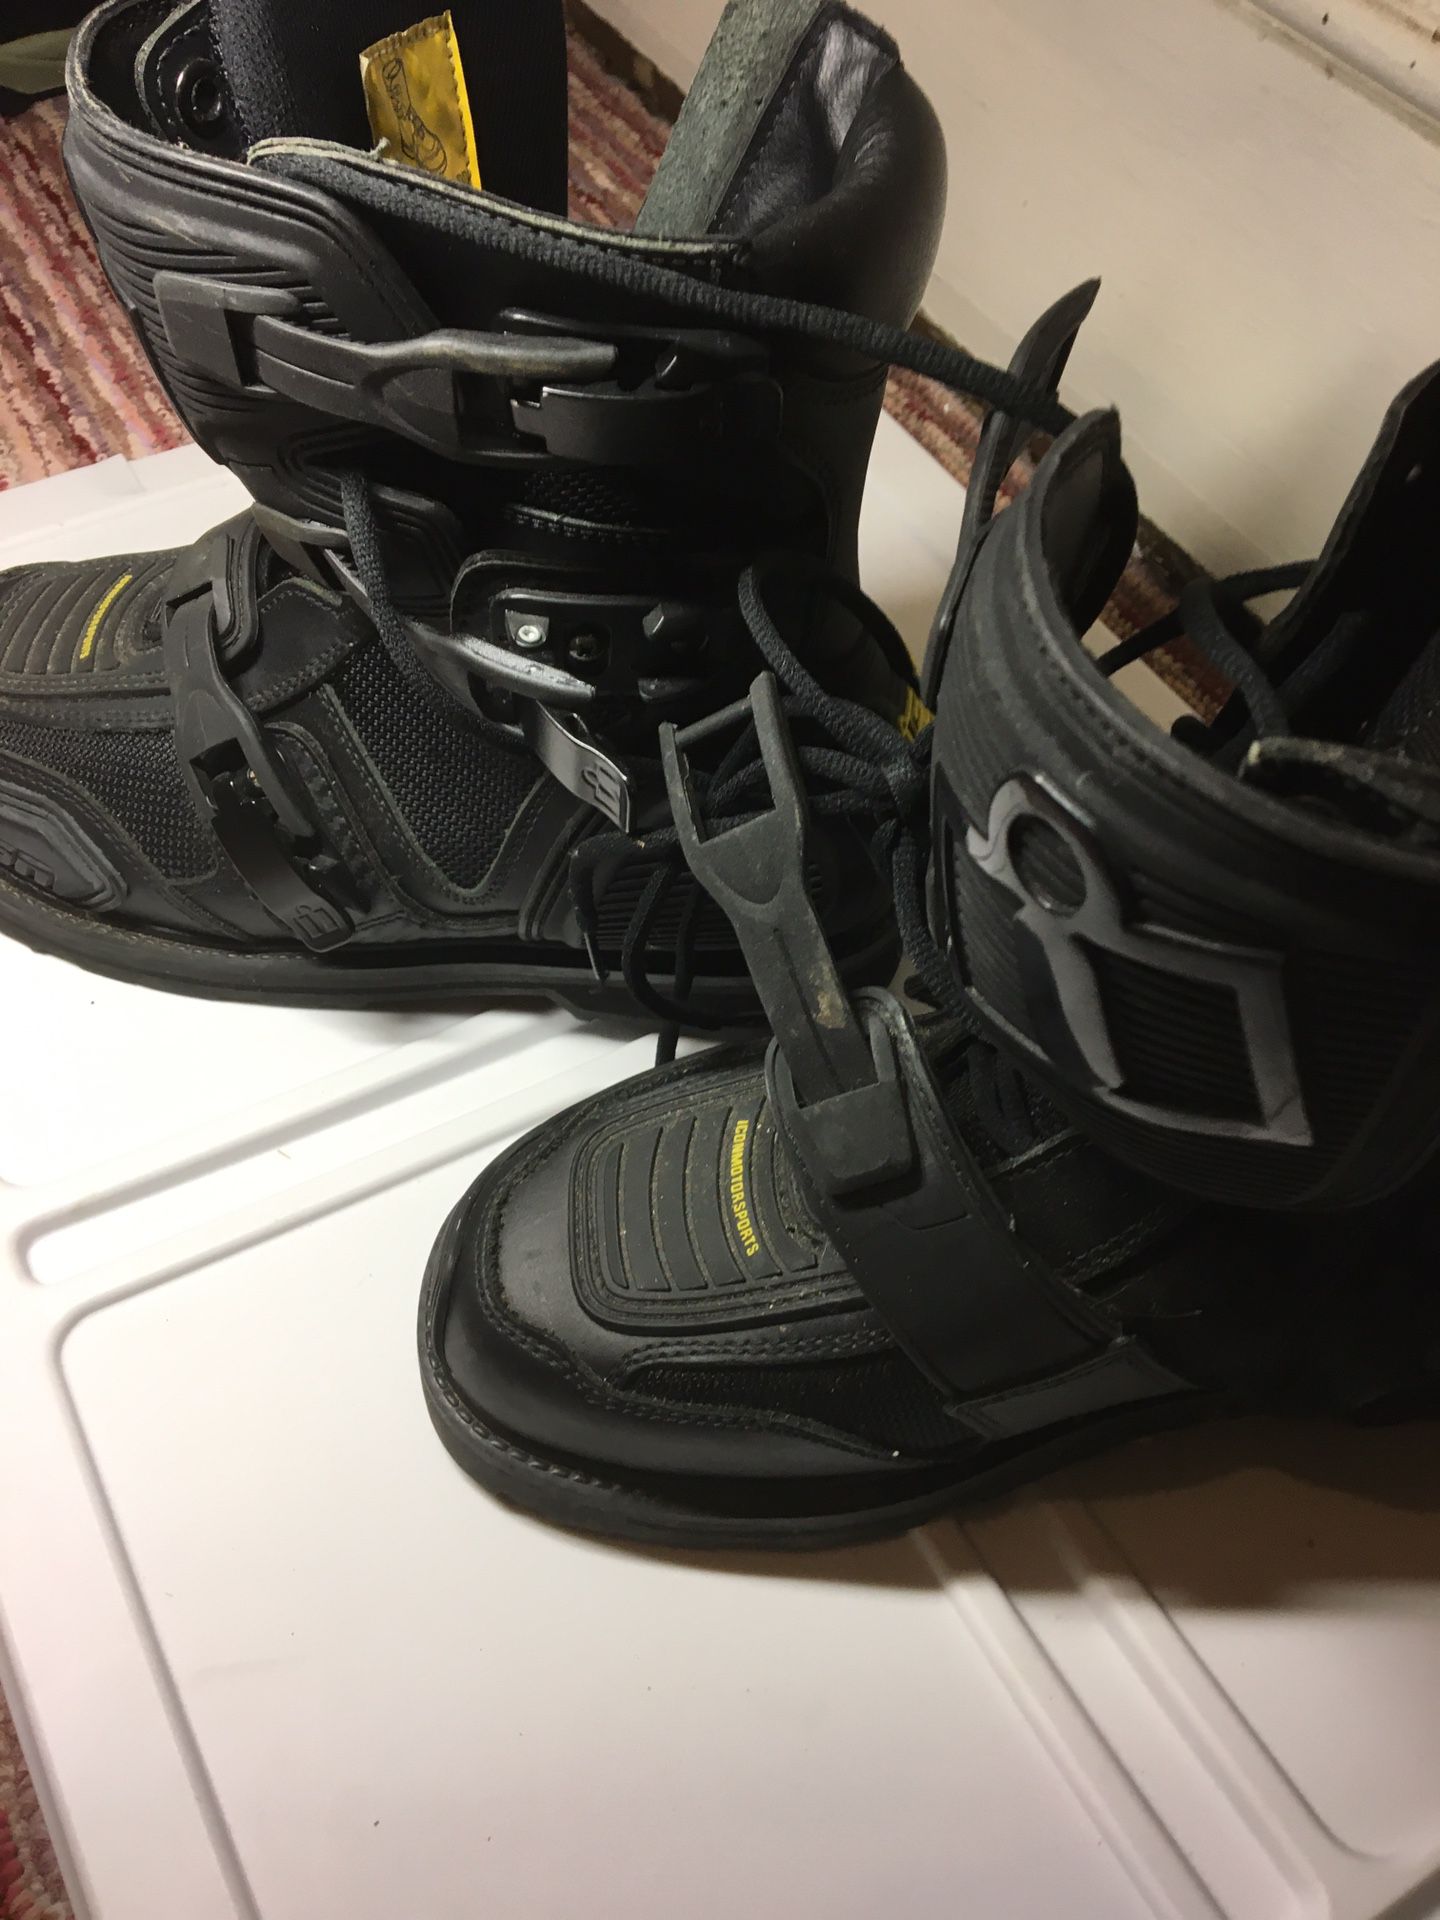 Motorcycle boots size 10